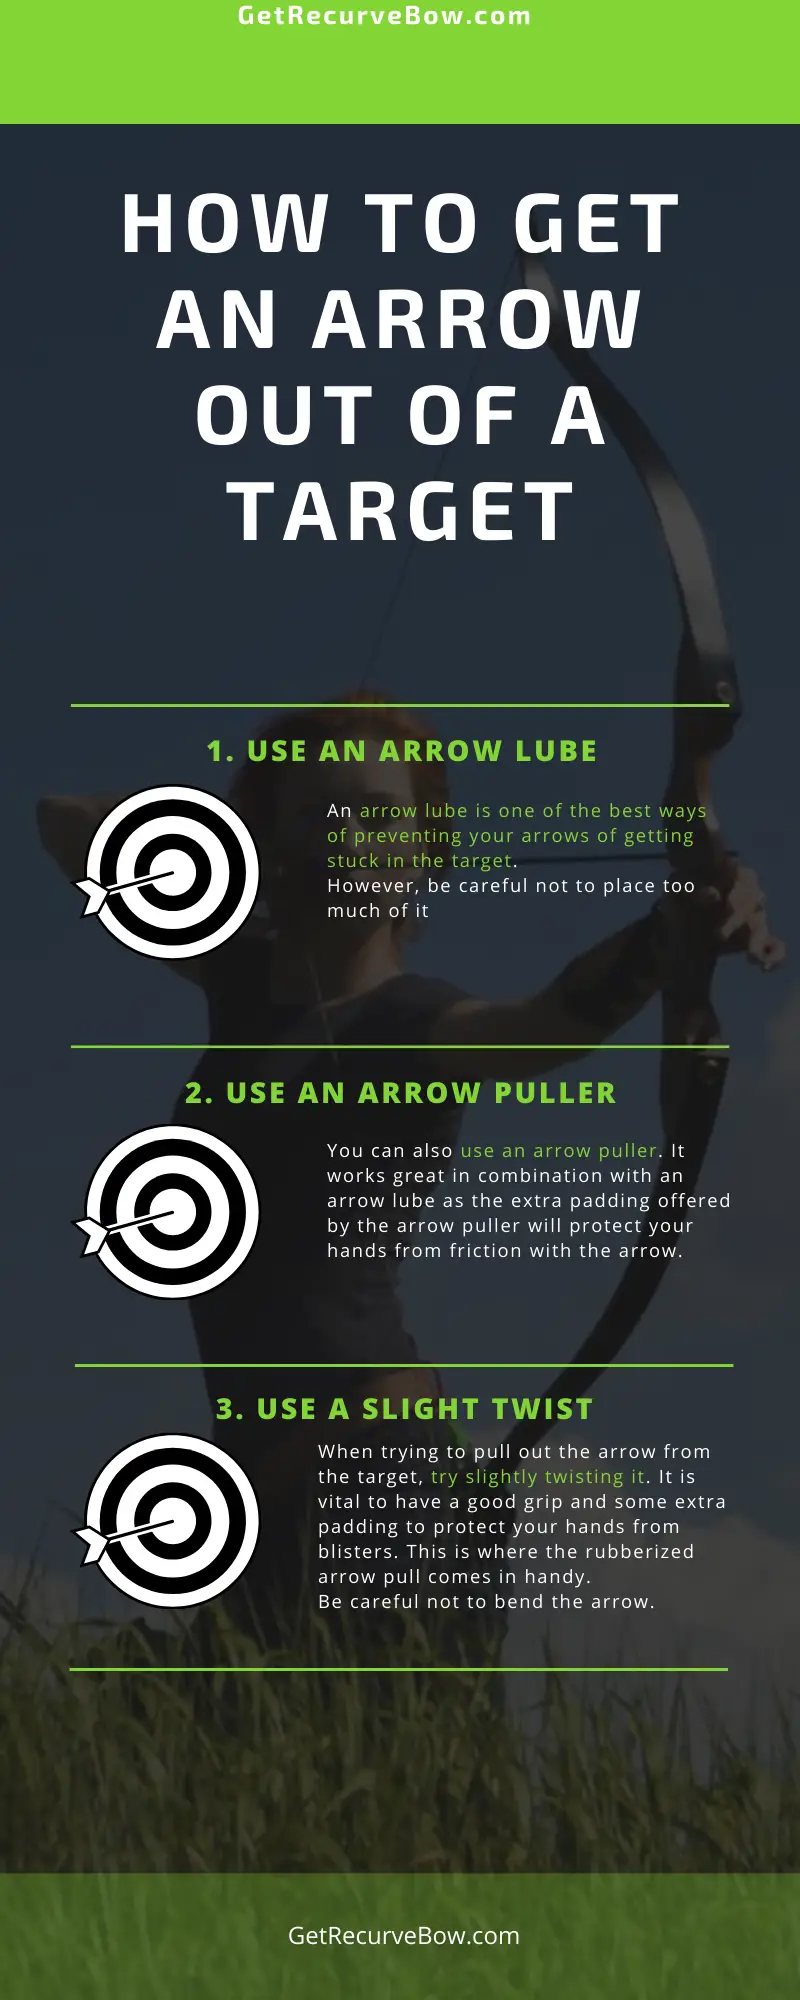 There are many ways how to get an arrow out of a target.